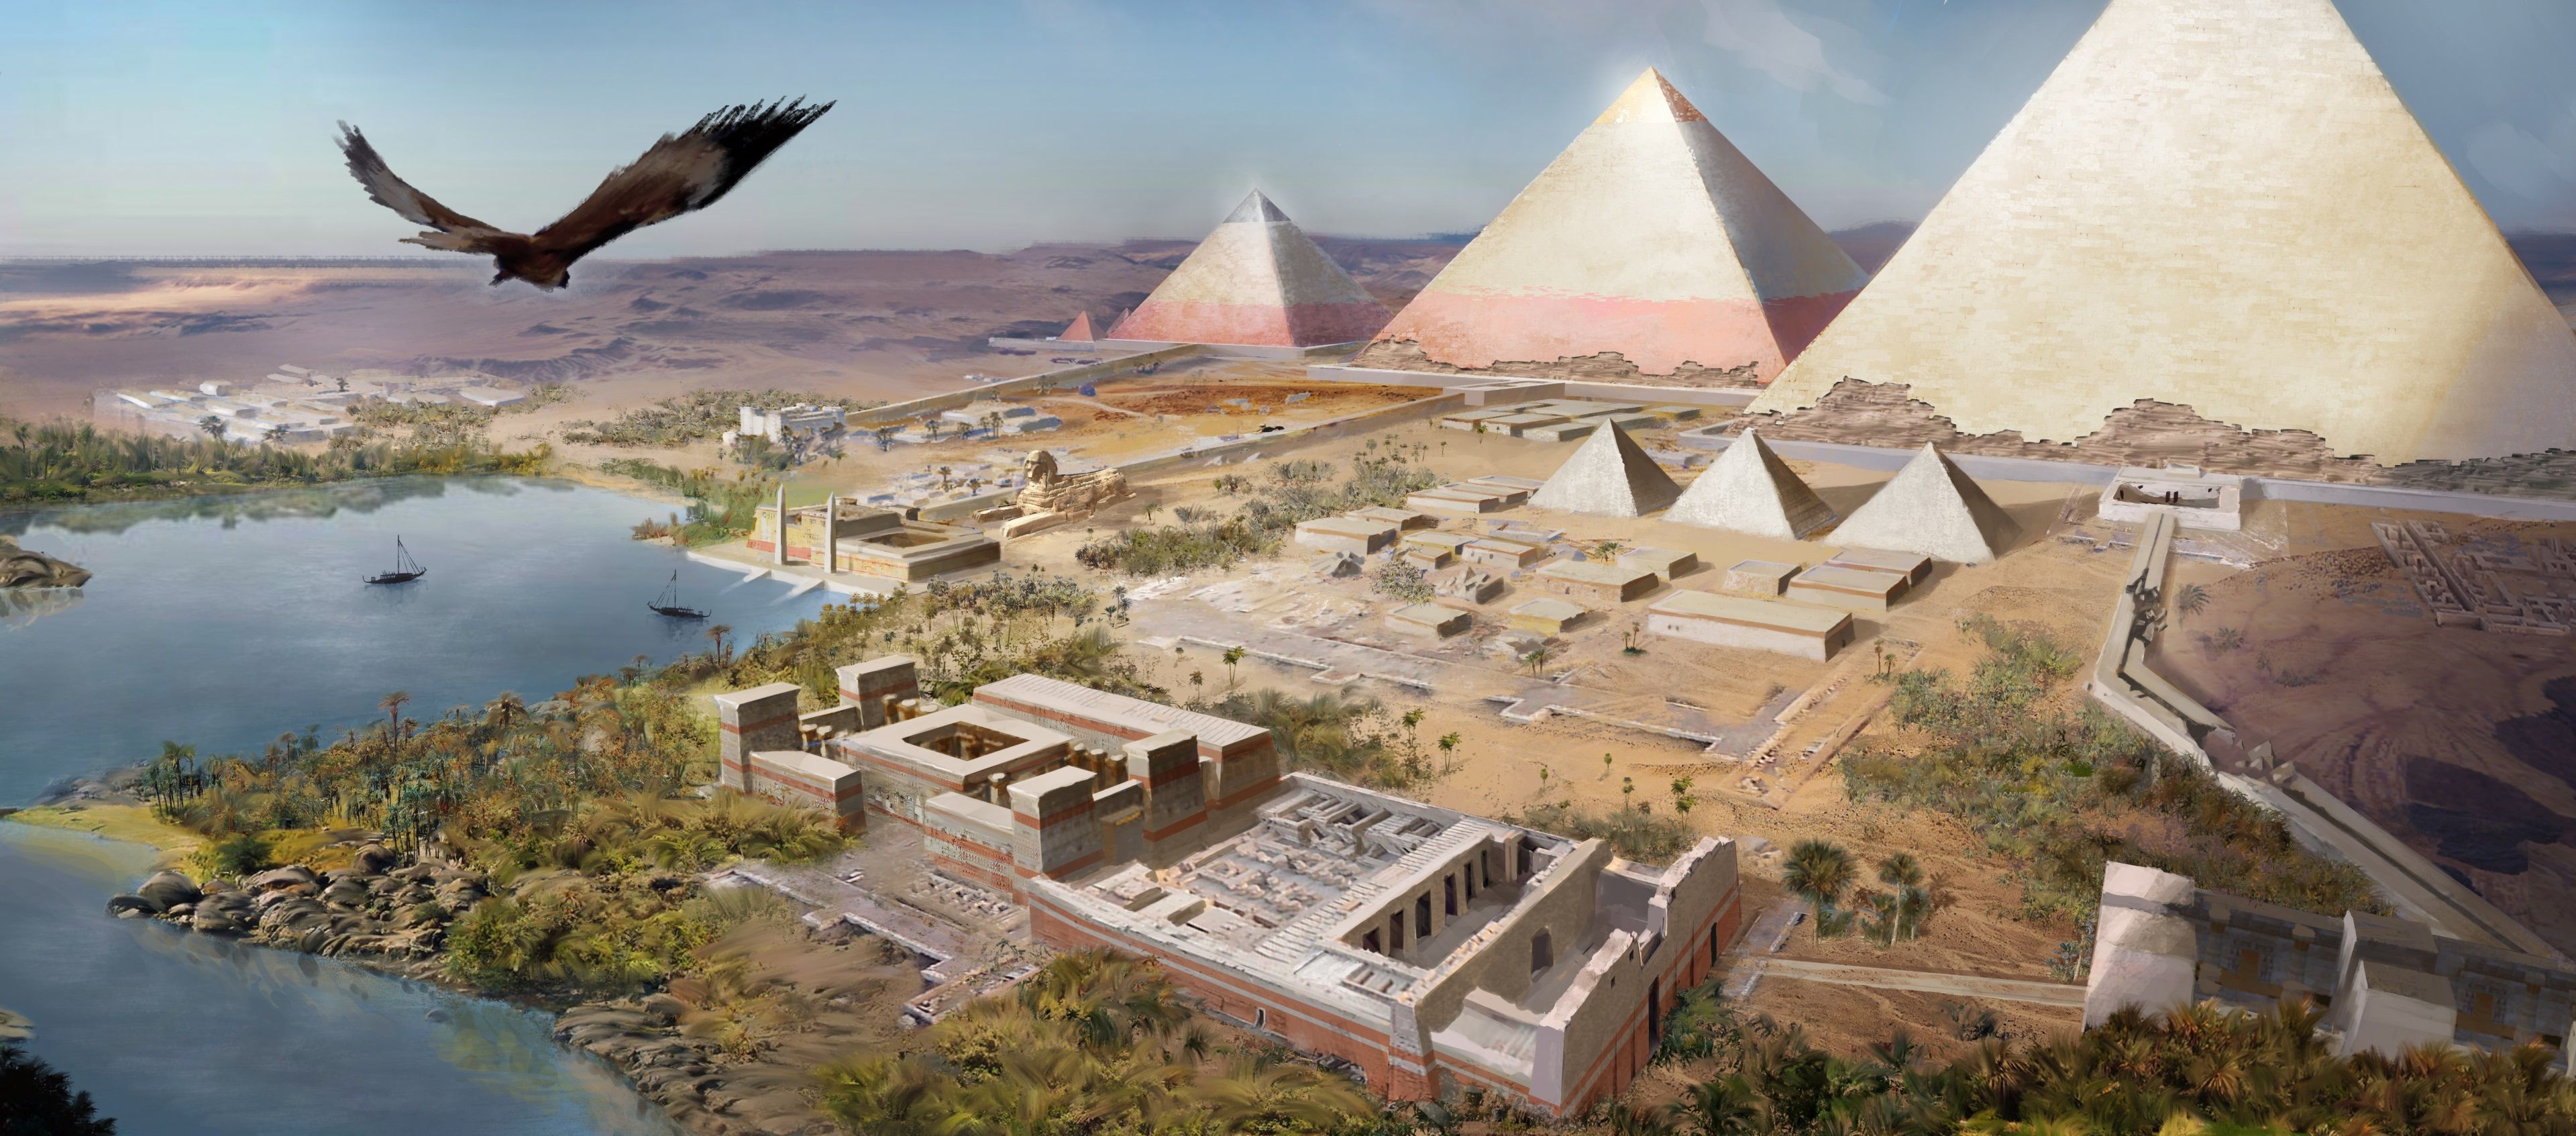 25 Excellent 4k wallpaper egypt You Can Use It Without A Penny ...